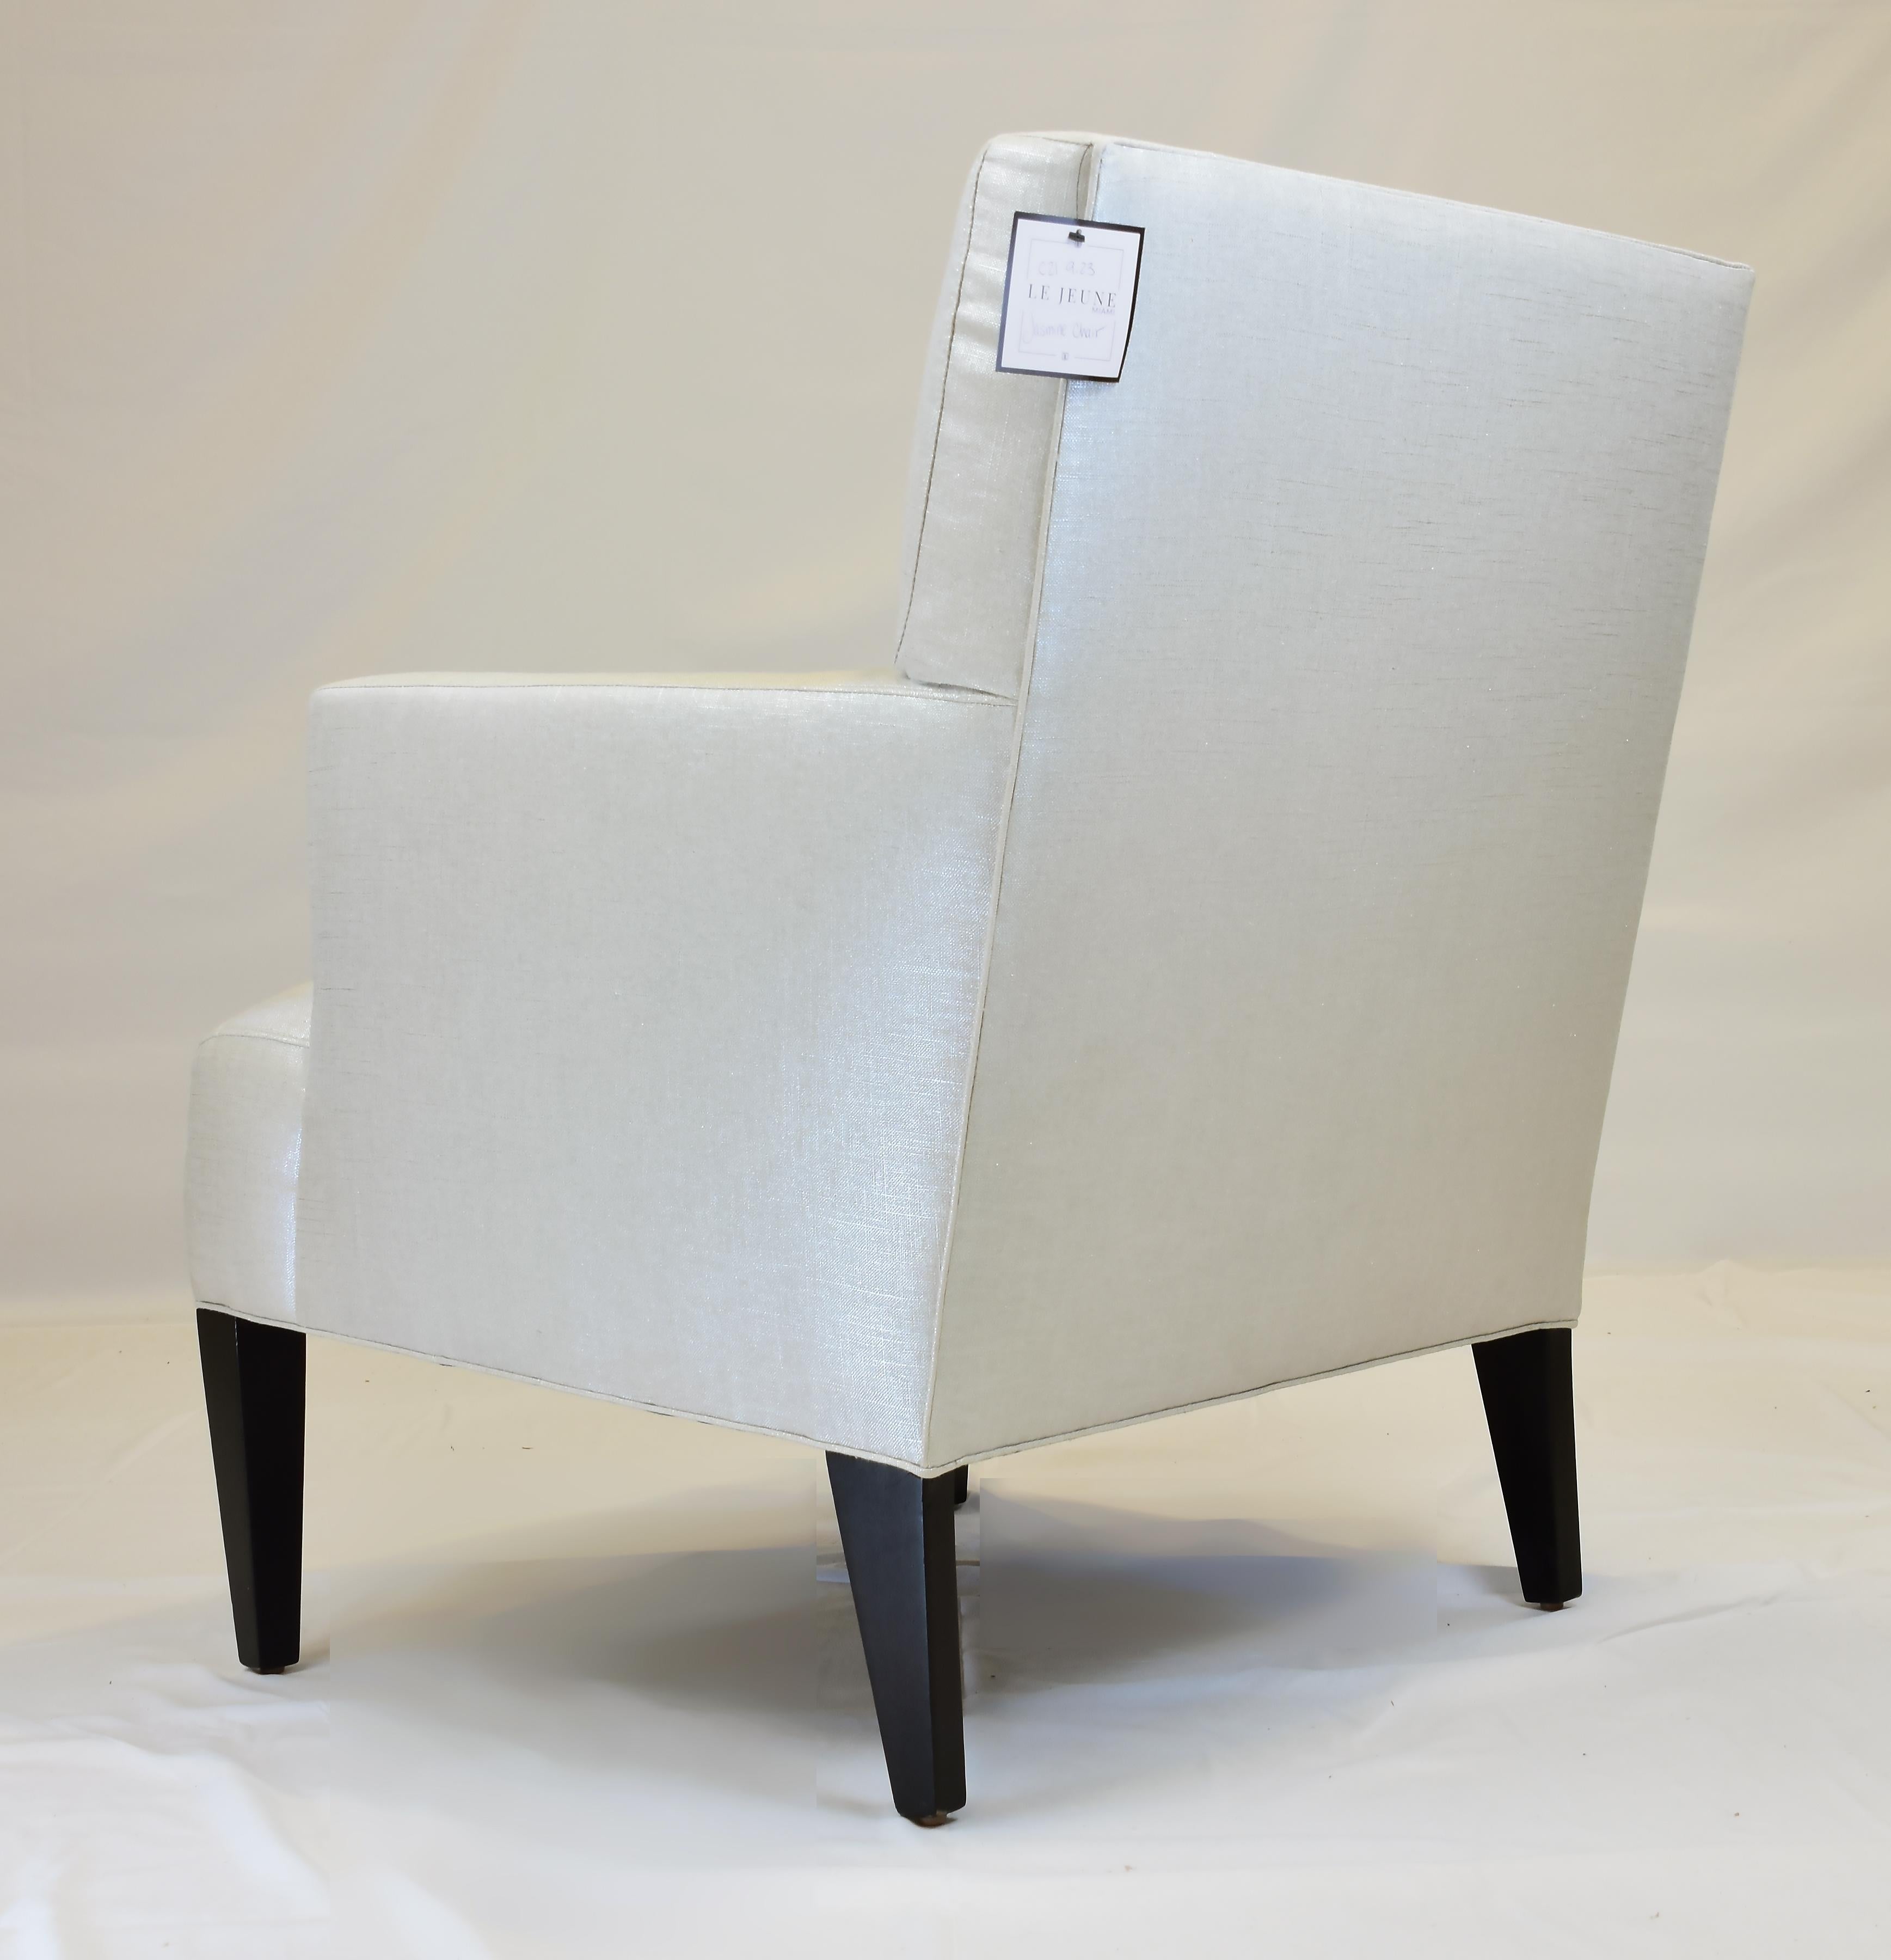 Le Jeune Upholstery Jasmine Armchair Showroom Model In Good Condition For Sale In Miami, FL